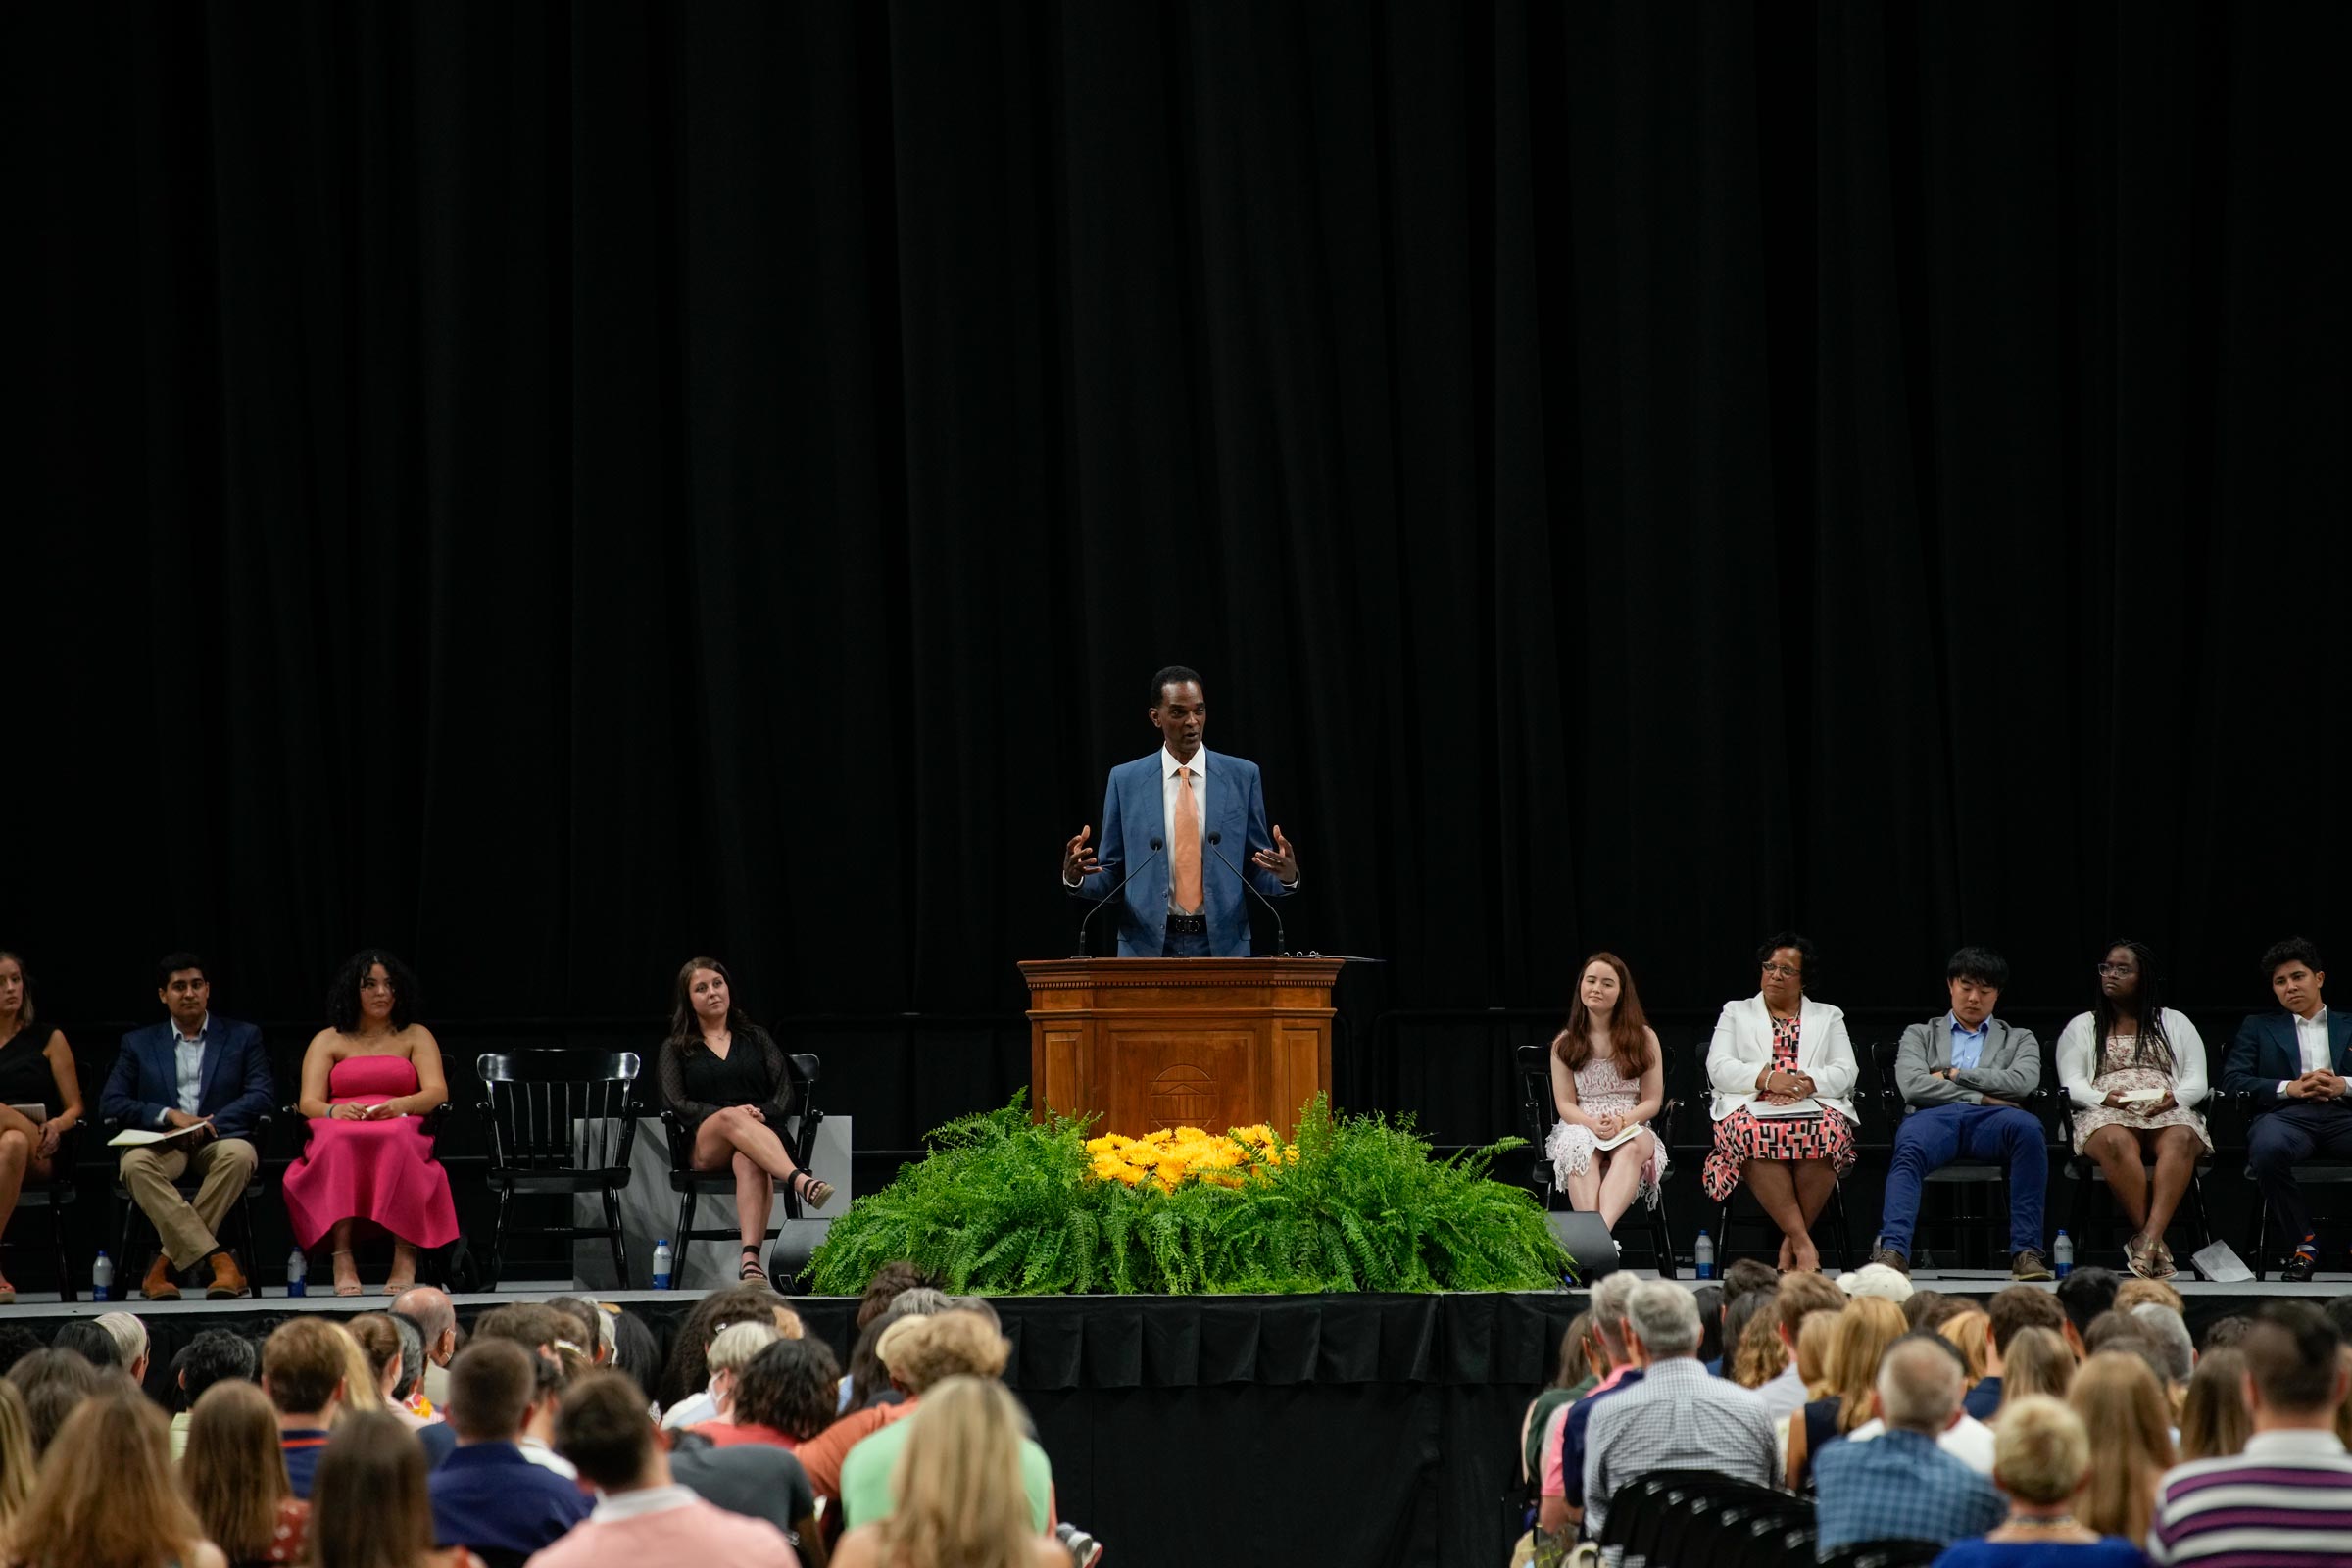 Ralph Sampson speaks from a podium on a stage flanked by the event's nine other speakers.